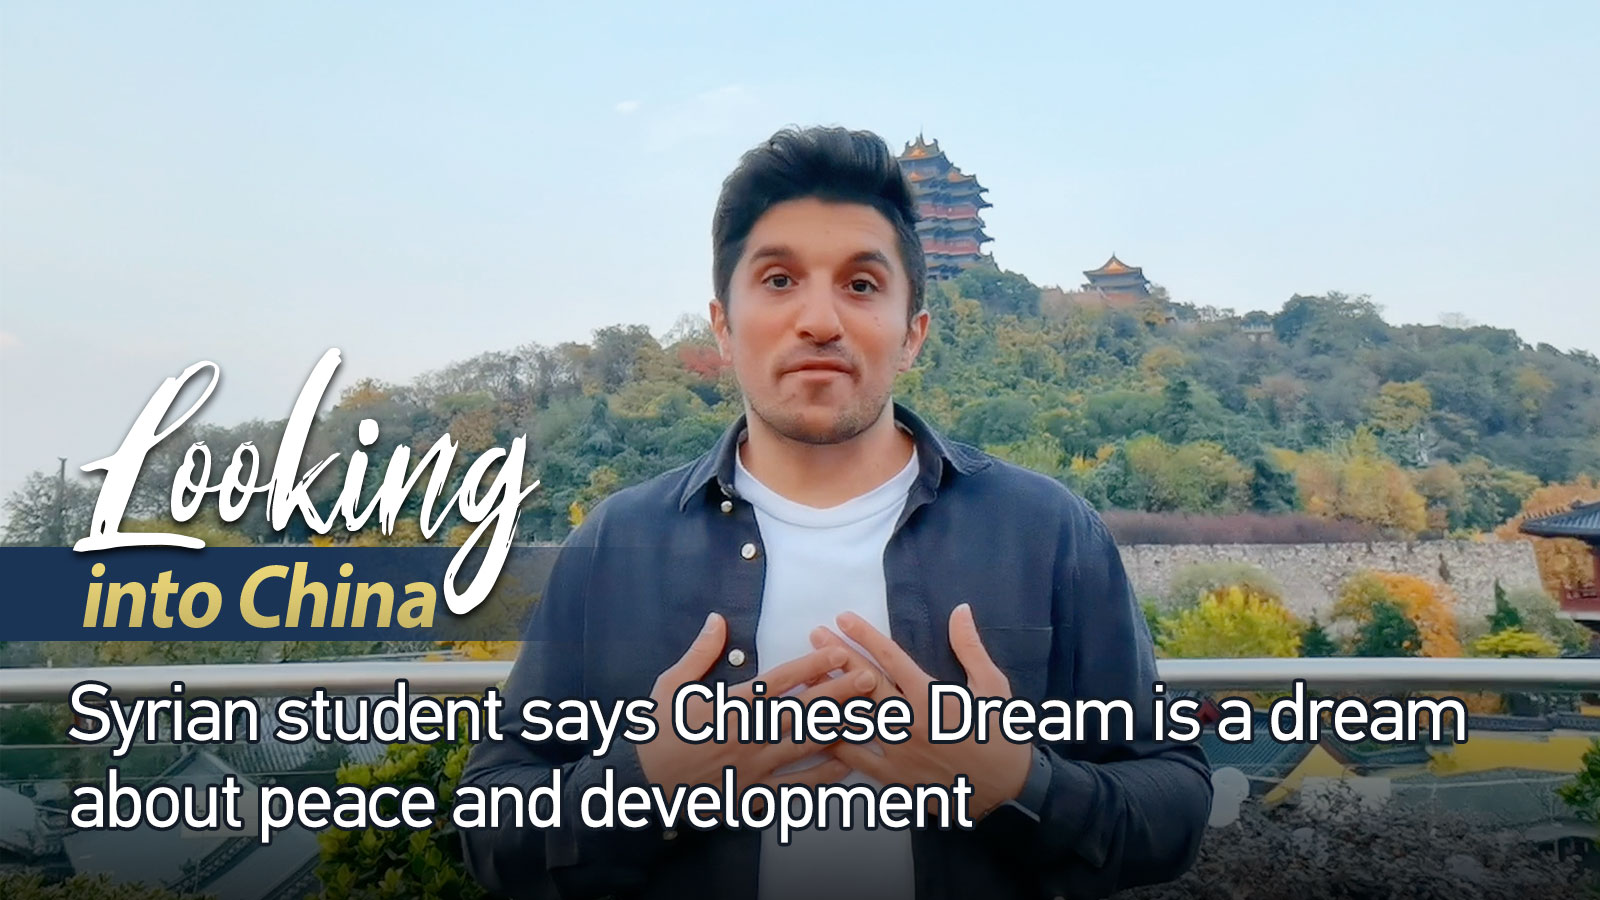 'Looking into China': Chinese Dream a dream about peace & development